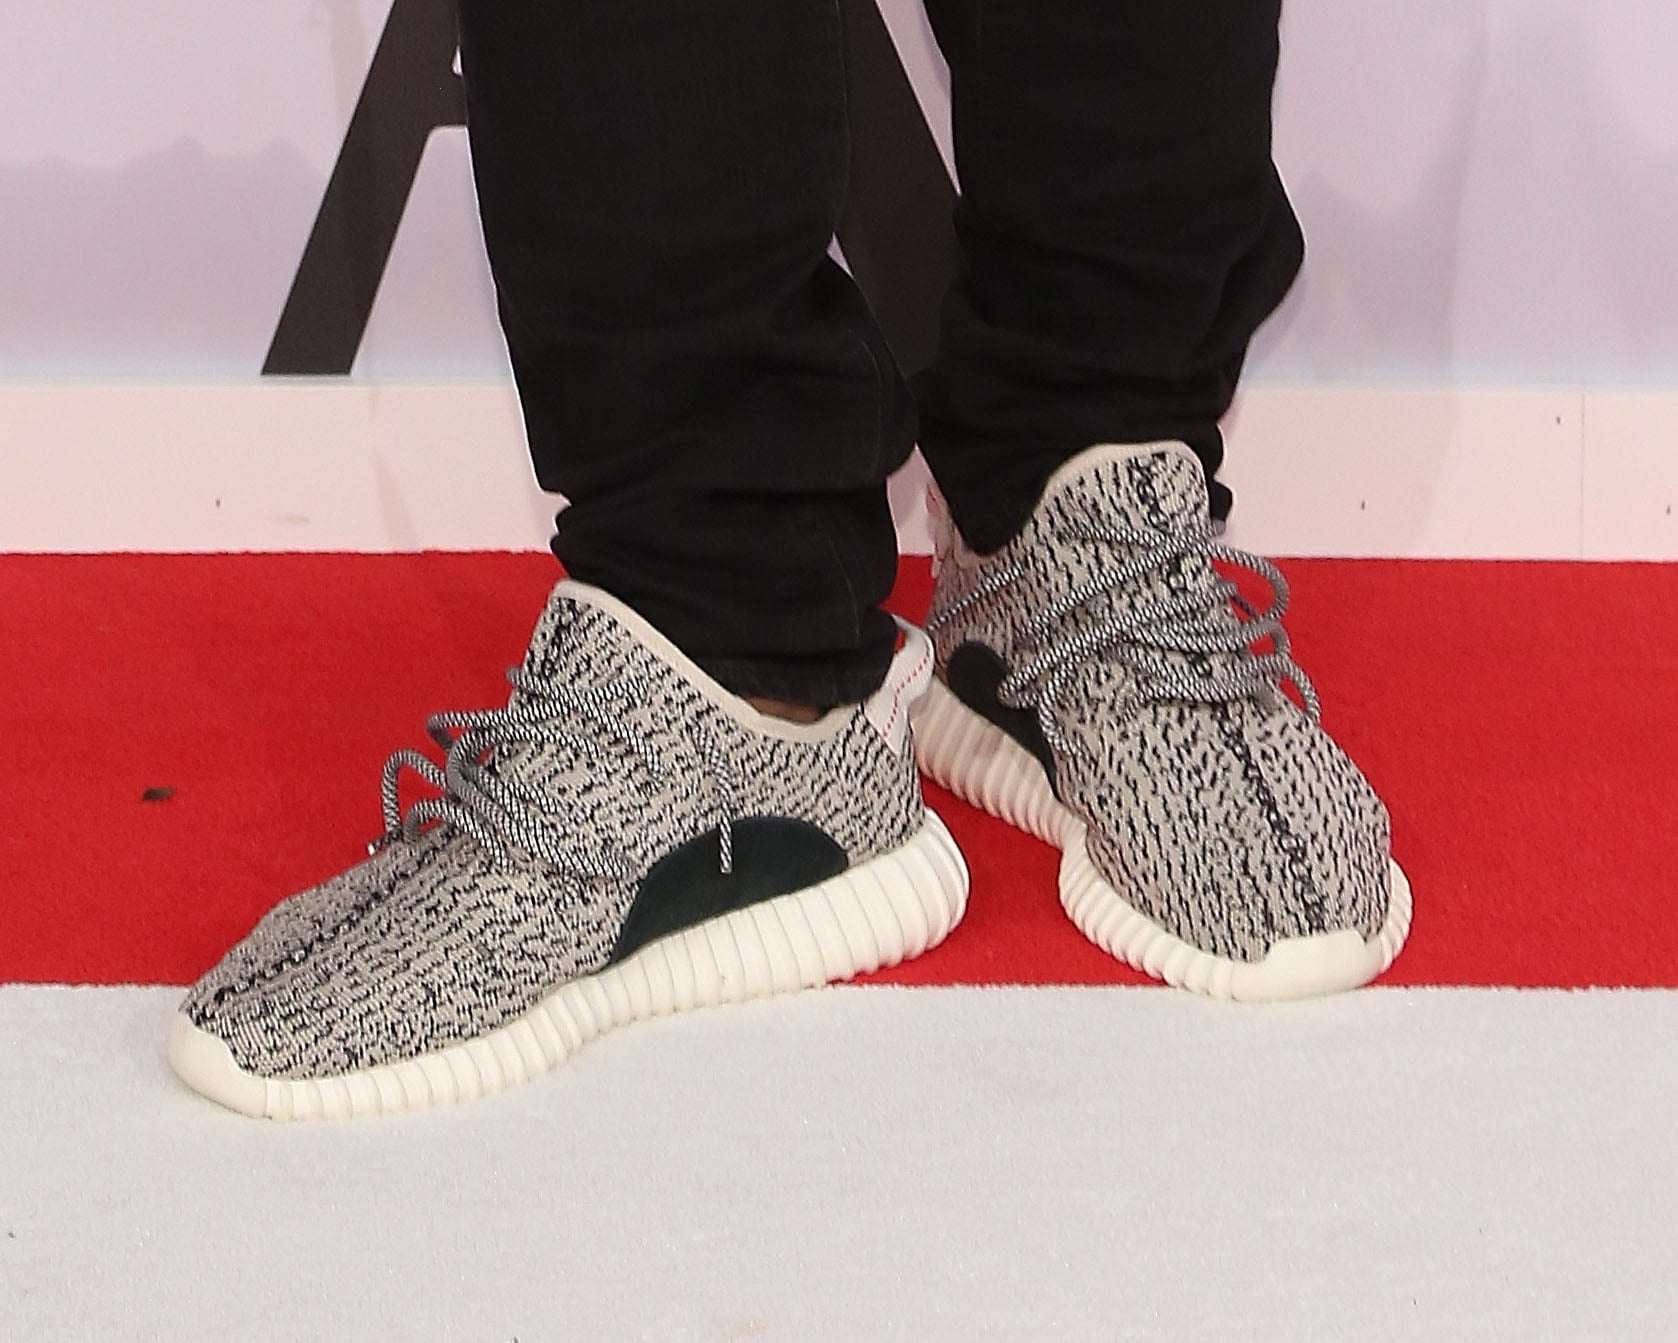 yeezy shoes what are they